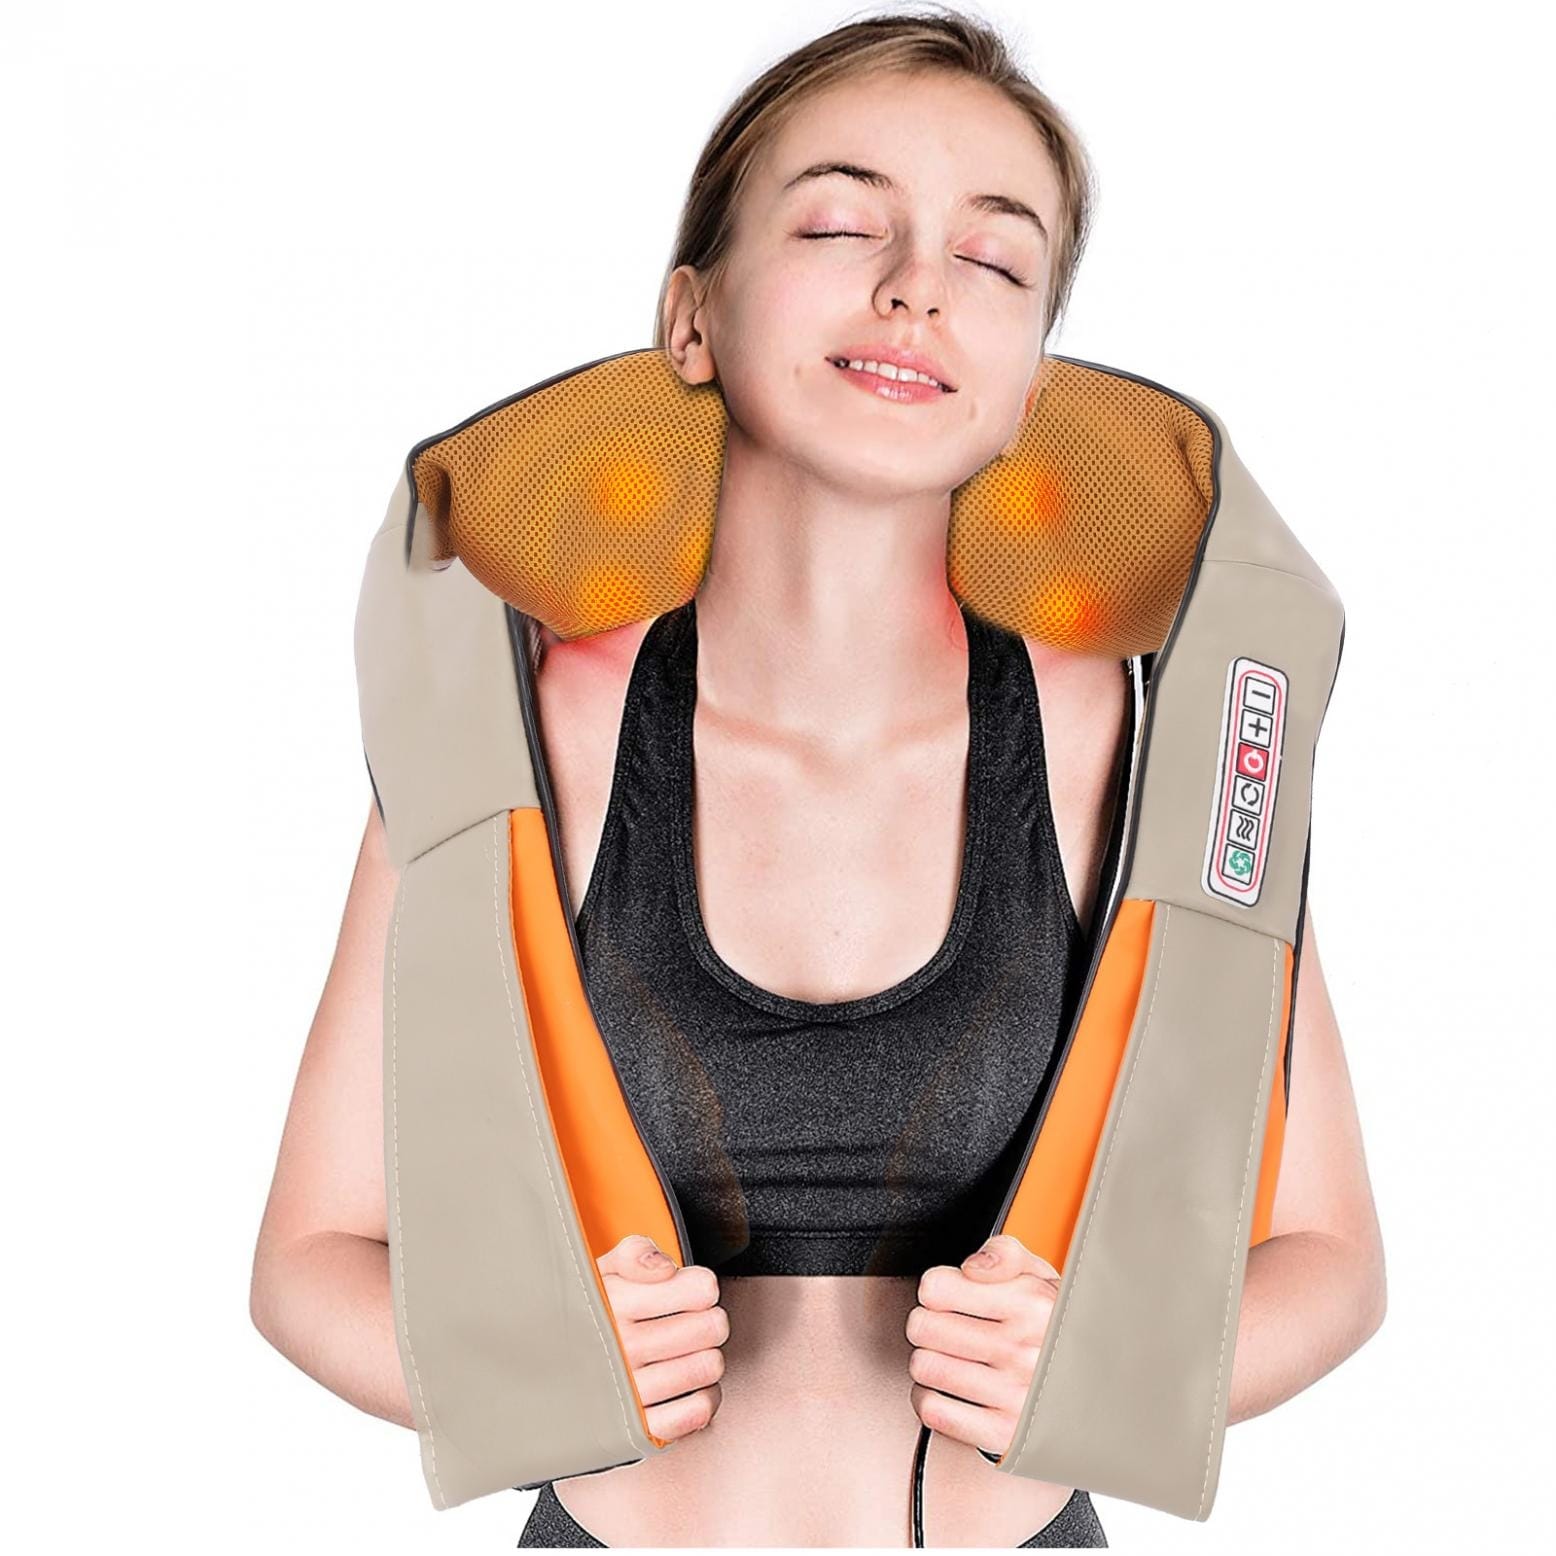 https://ak1.ostkcdn.com/images/products/is/images/direct/2dfaecfaf88f33fc17b975a9583bed324fbcde16/Shoulder-Massager-With-Heat-Electric-Shiatsu-Back-Massage-Device-Kneading-Pillow.jpg